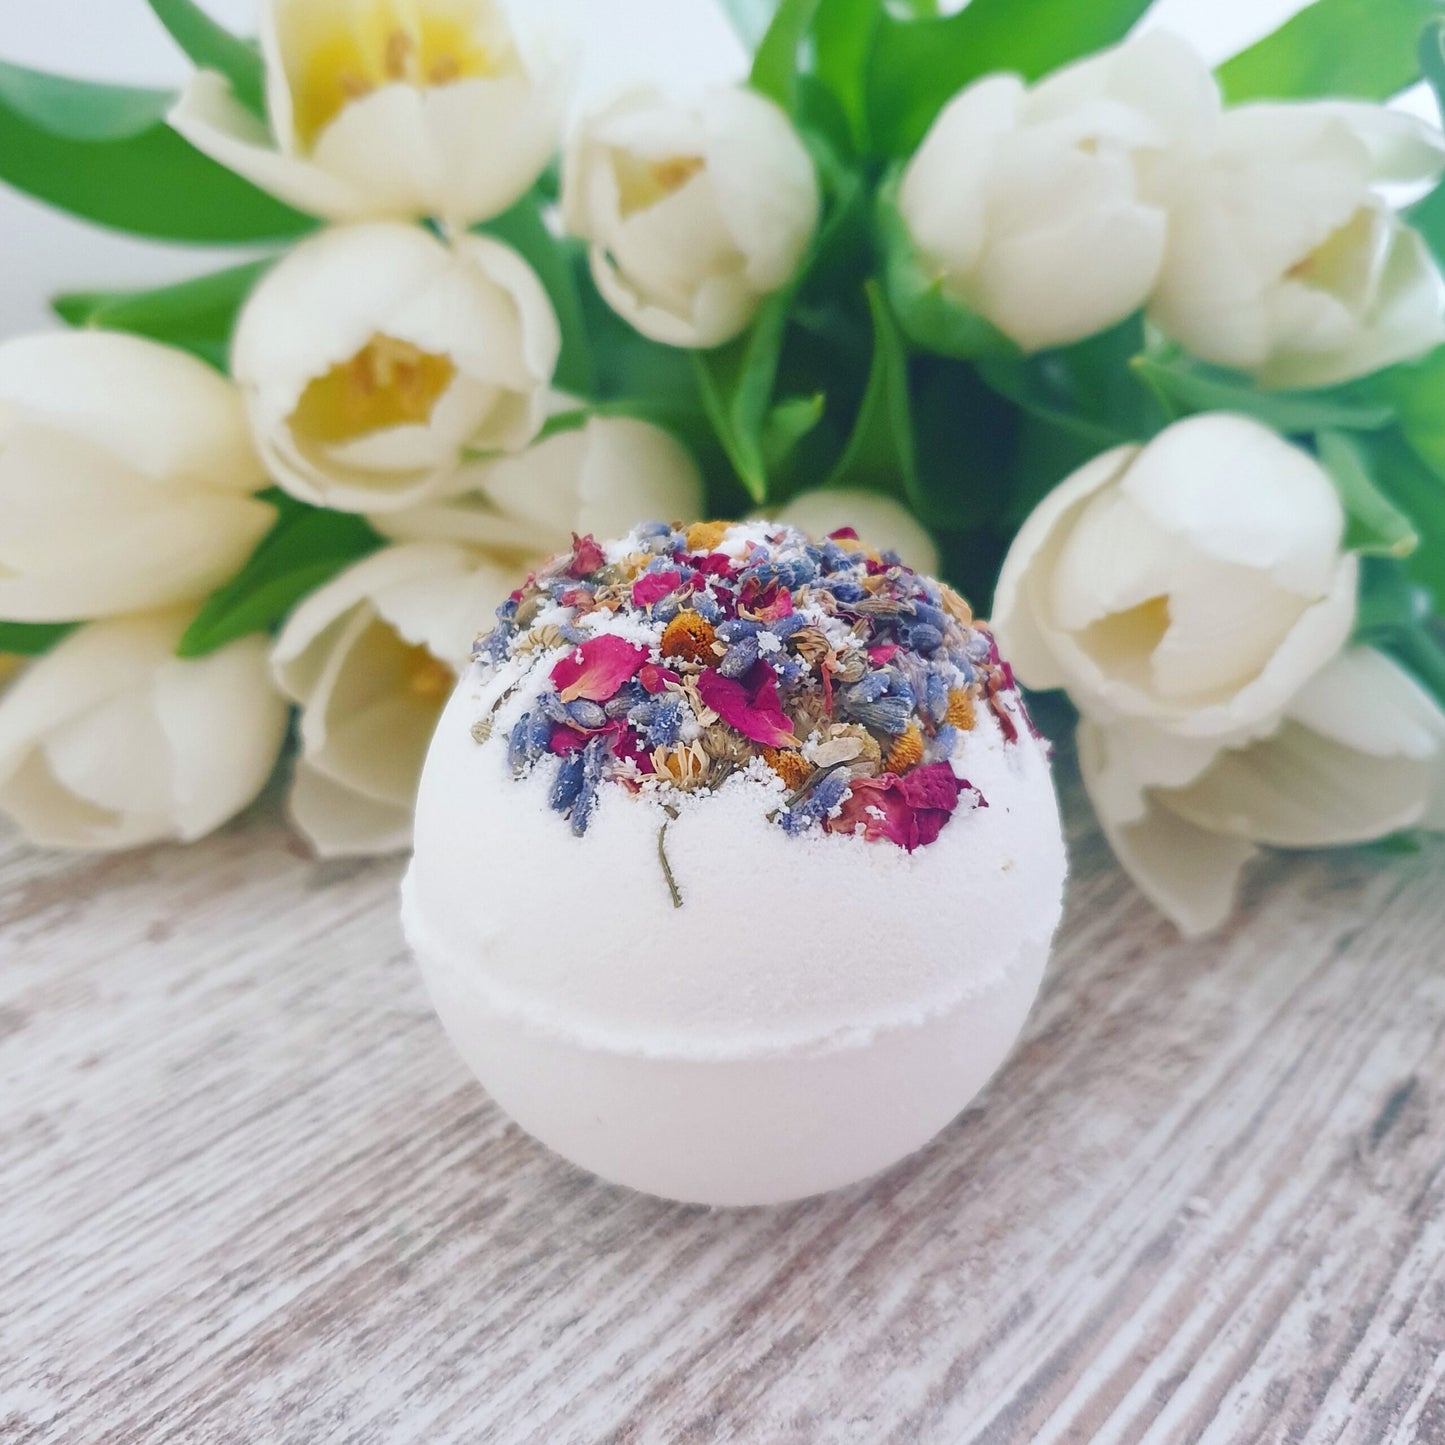 A side on view of the Sweet Dreams Secret Bath Bomb, displaying the dried petals encased in the top of the bath bomb.